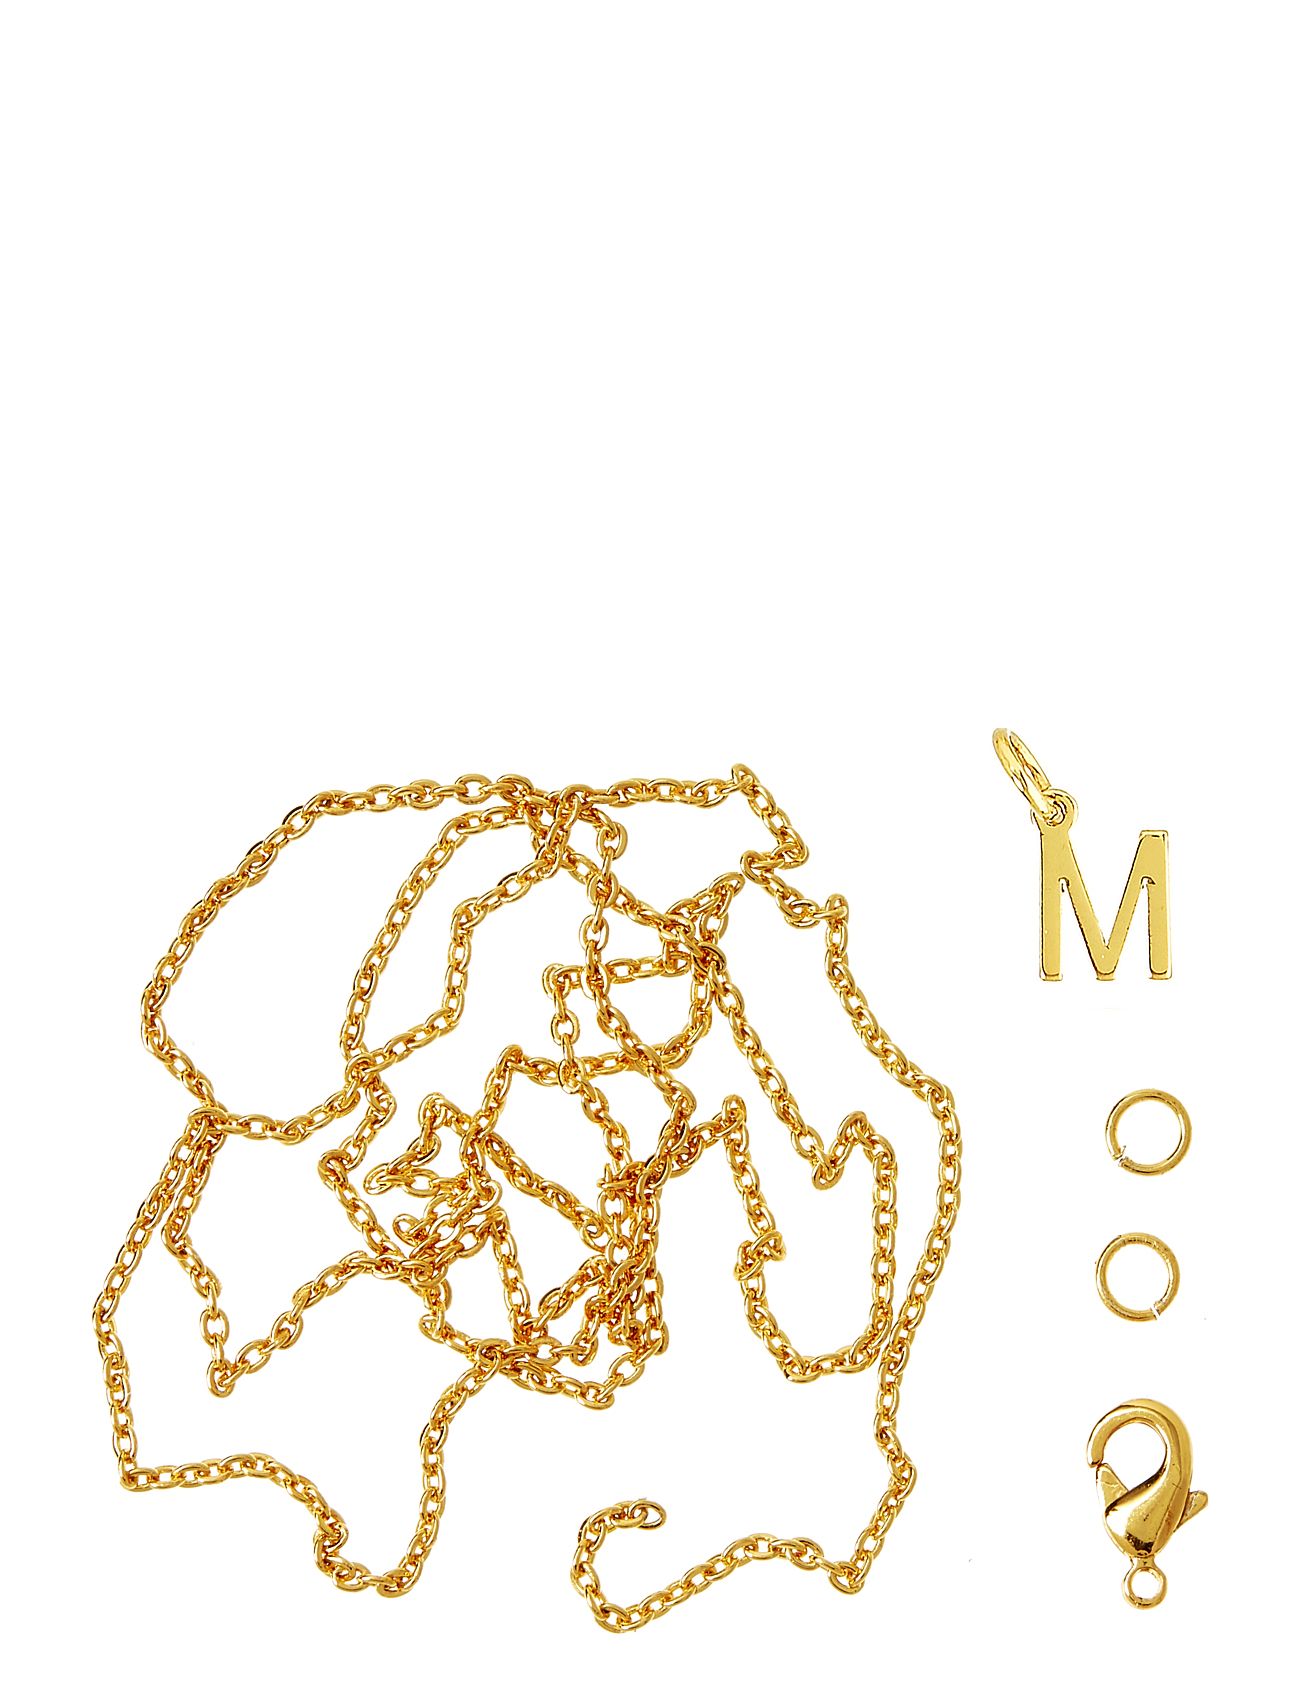 Letter M Gp With O-Ring, Chain And Clasp Toys Creativity Drawing & Crafts Craft Jewellery & Accessories Gold Me & My Box